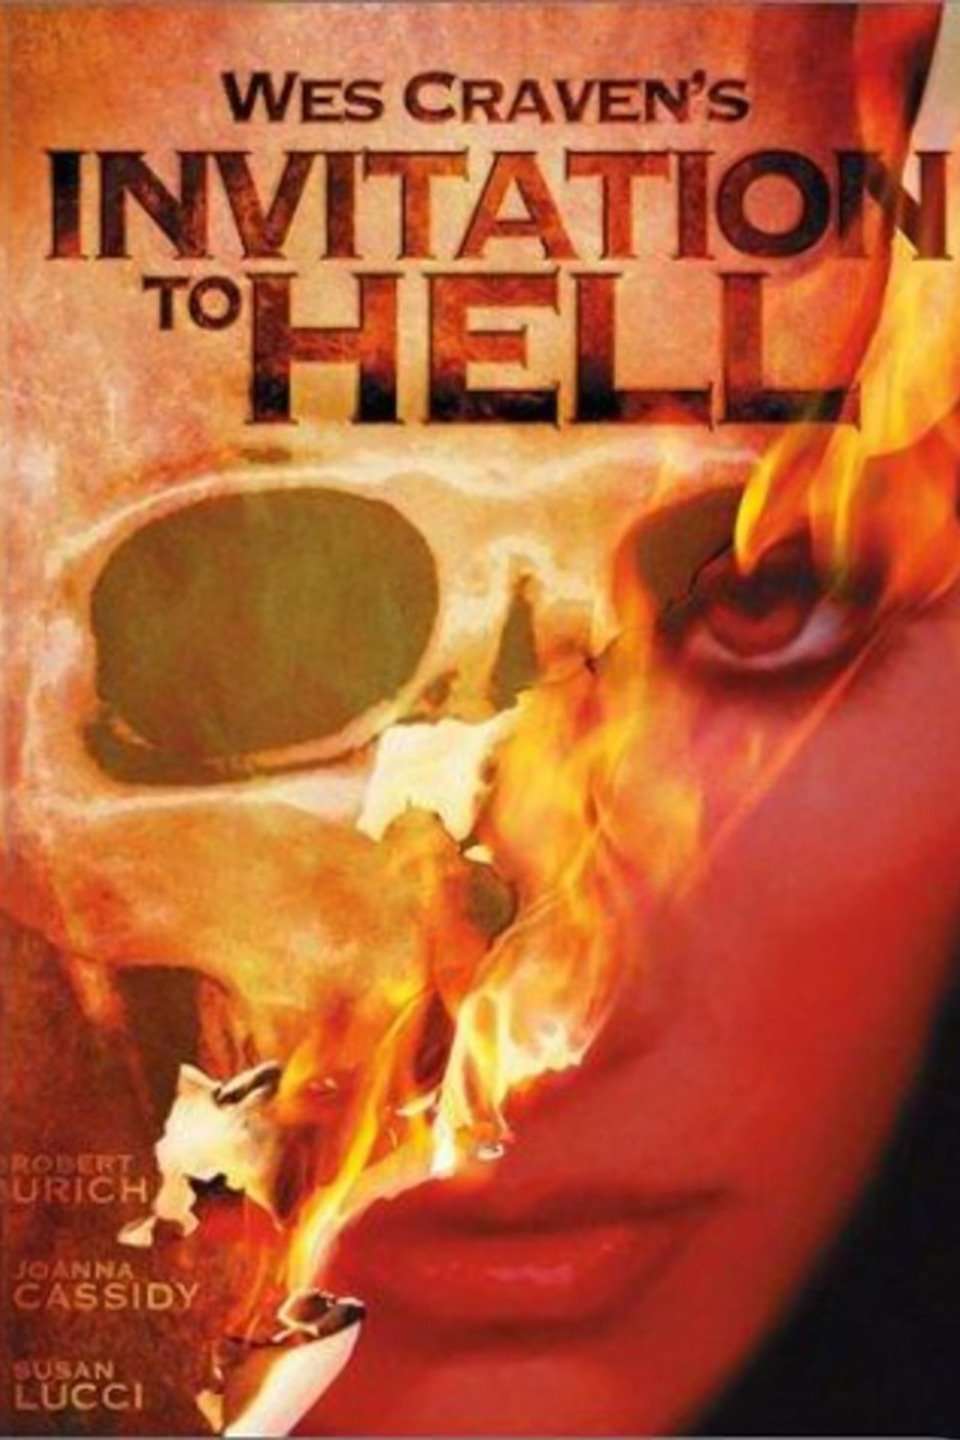 Invitation to Hell (1984) by Wes Craven